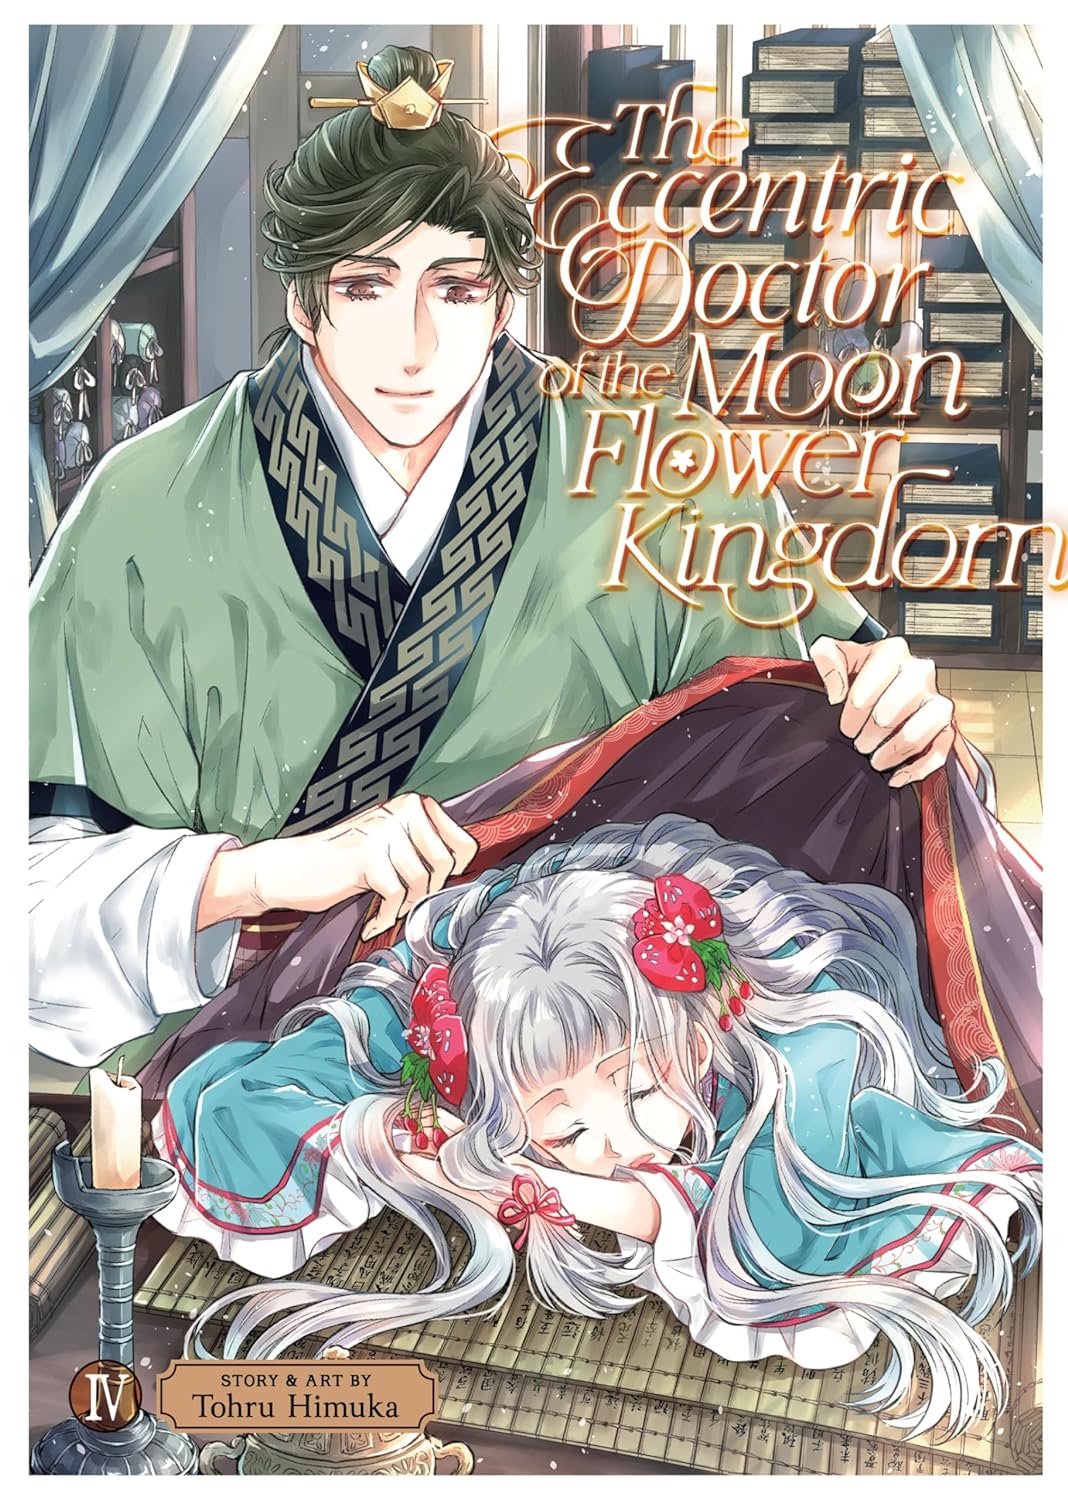 (05/12/2023) The Eccentric Doctor of the Moon Flower Kingdom Vol. 04